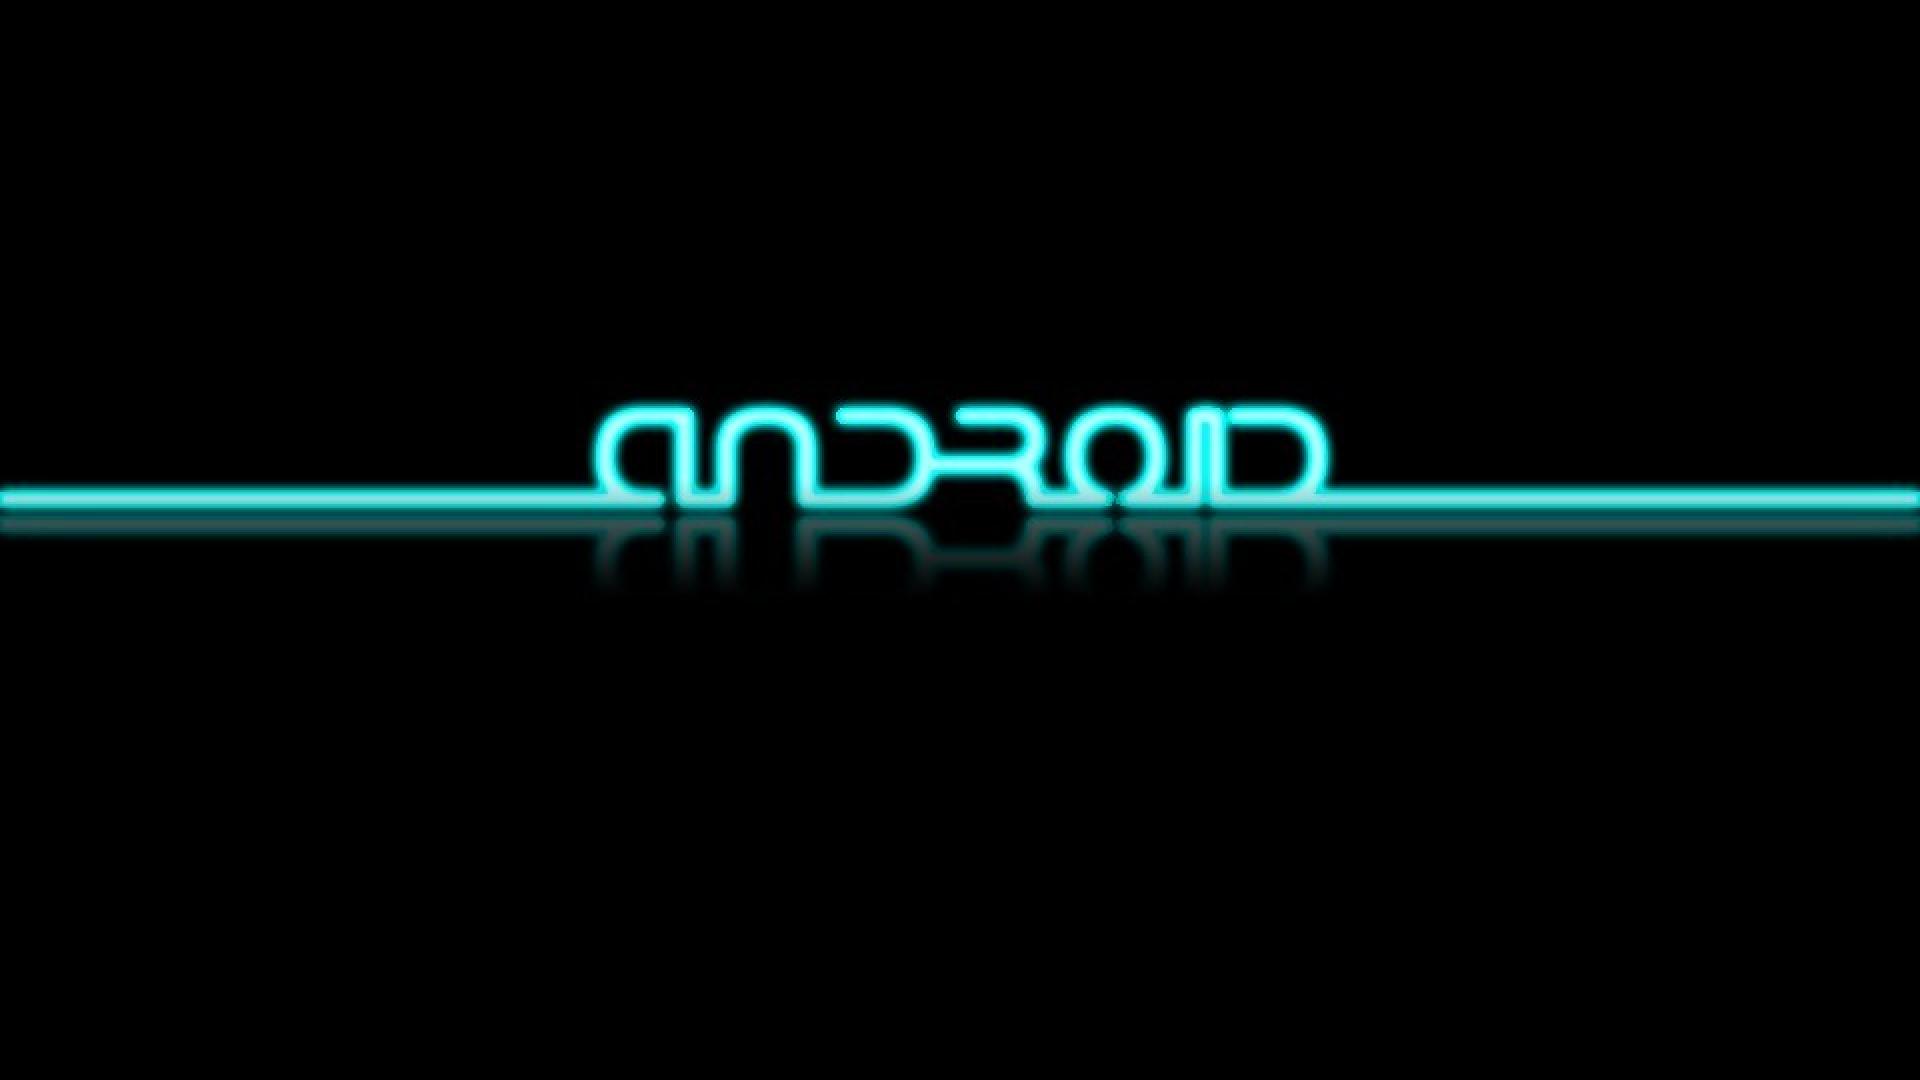 Neon Wallpaper Hd Android